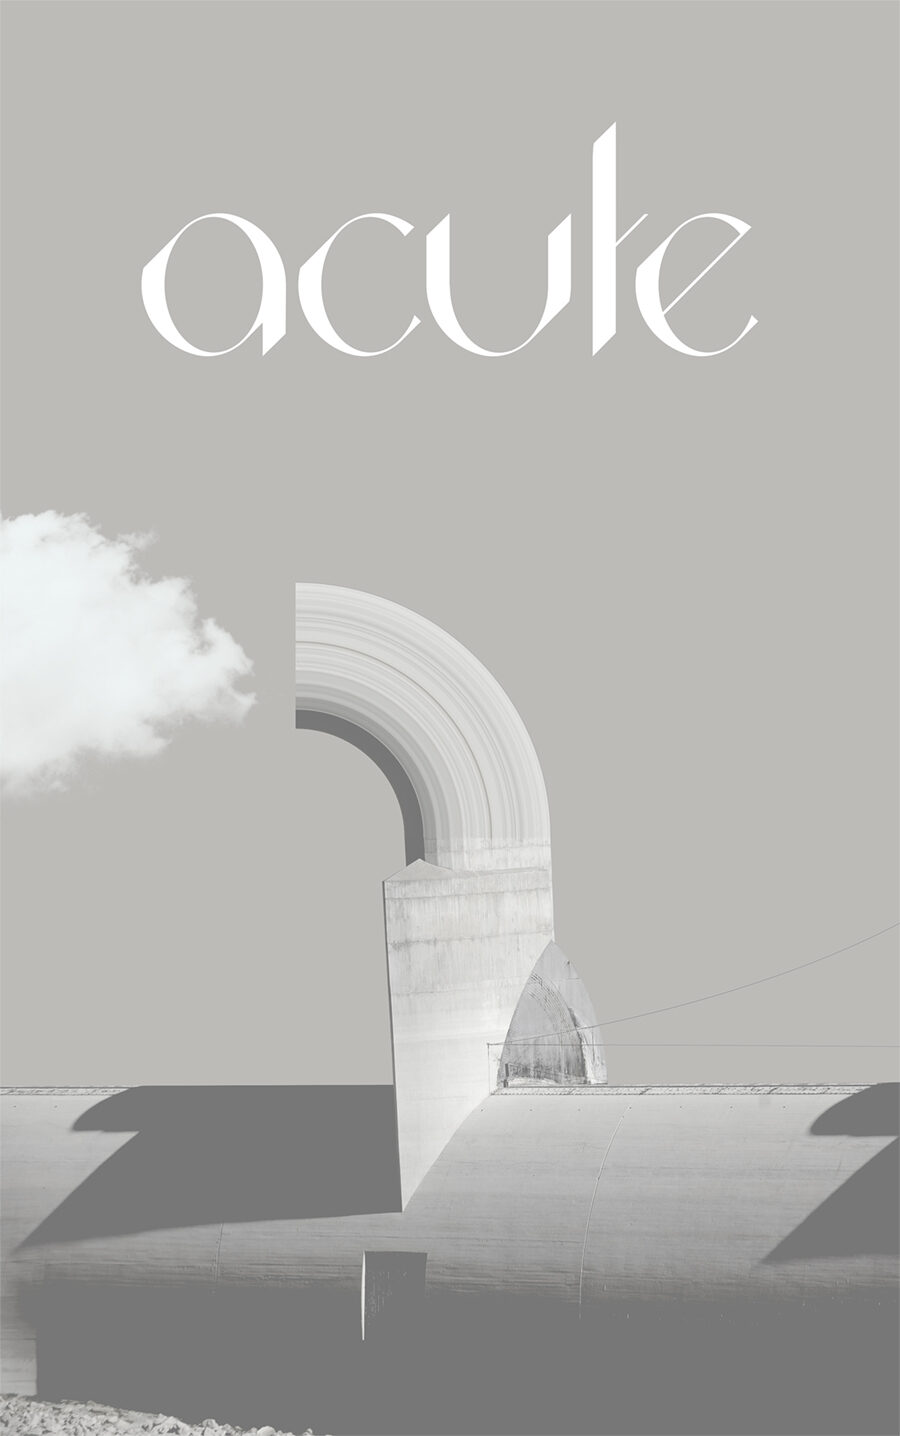 Acute – The Typeface